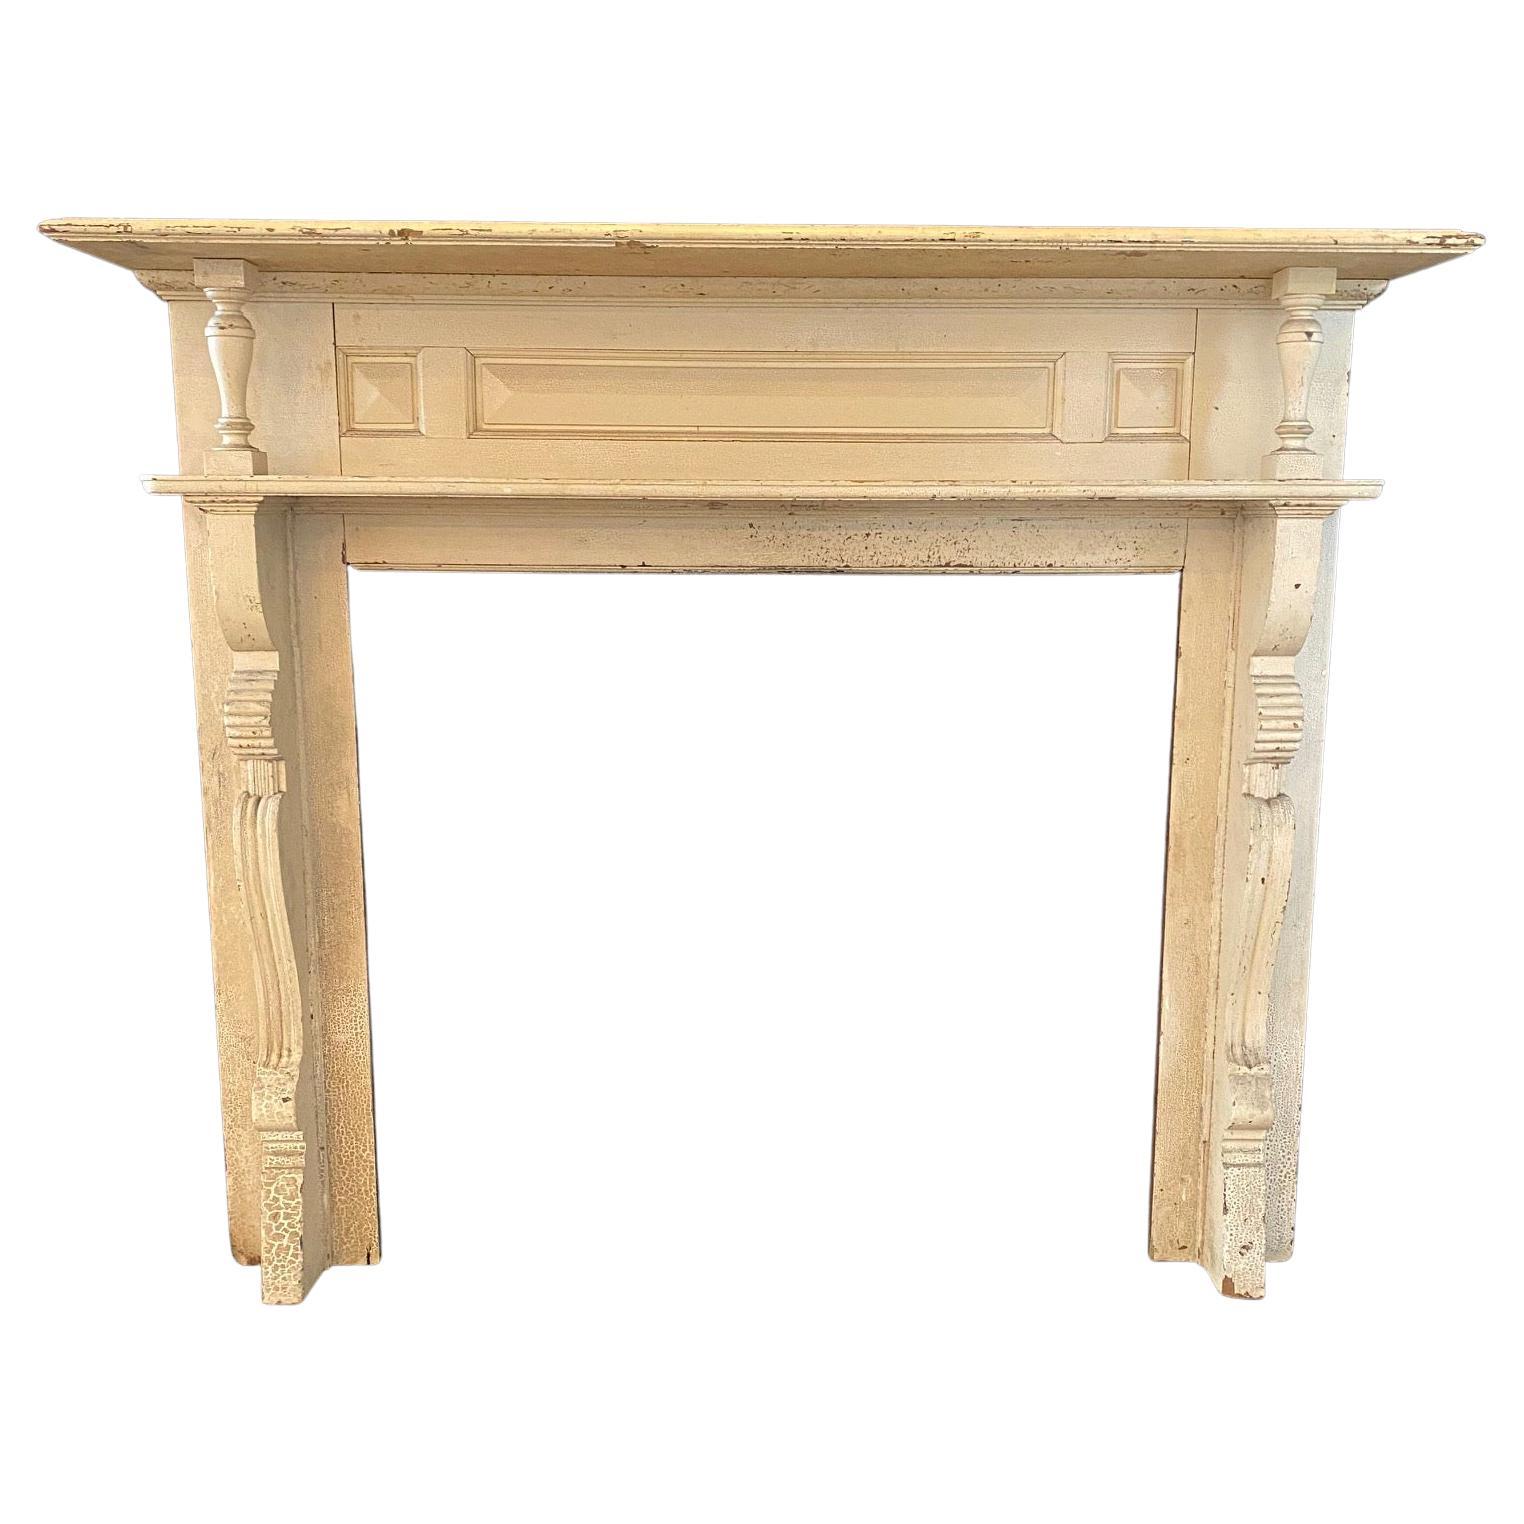 Early 19th Century Federal Fireplace Mantel Found in Maine For Sale